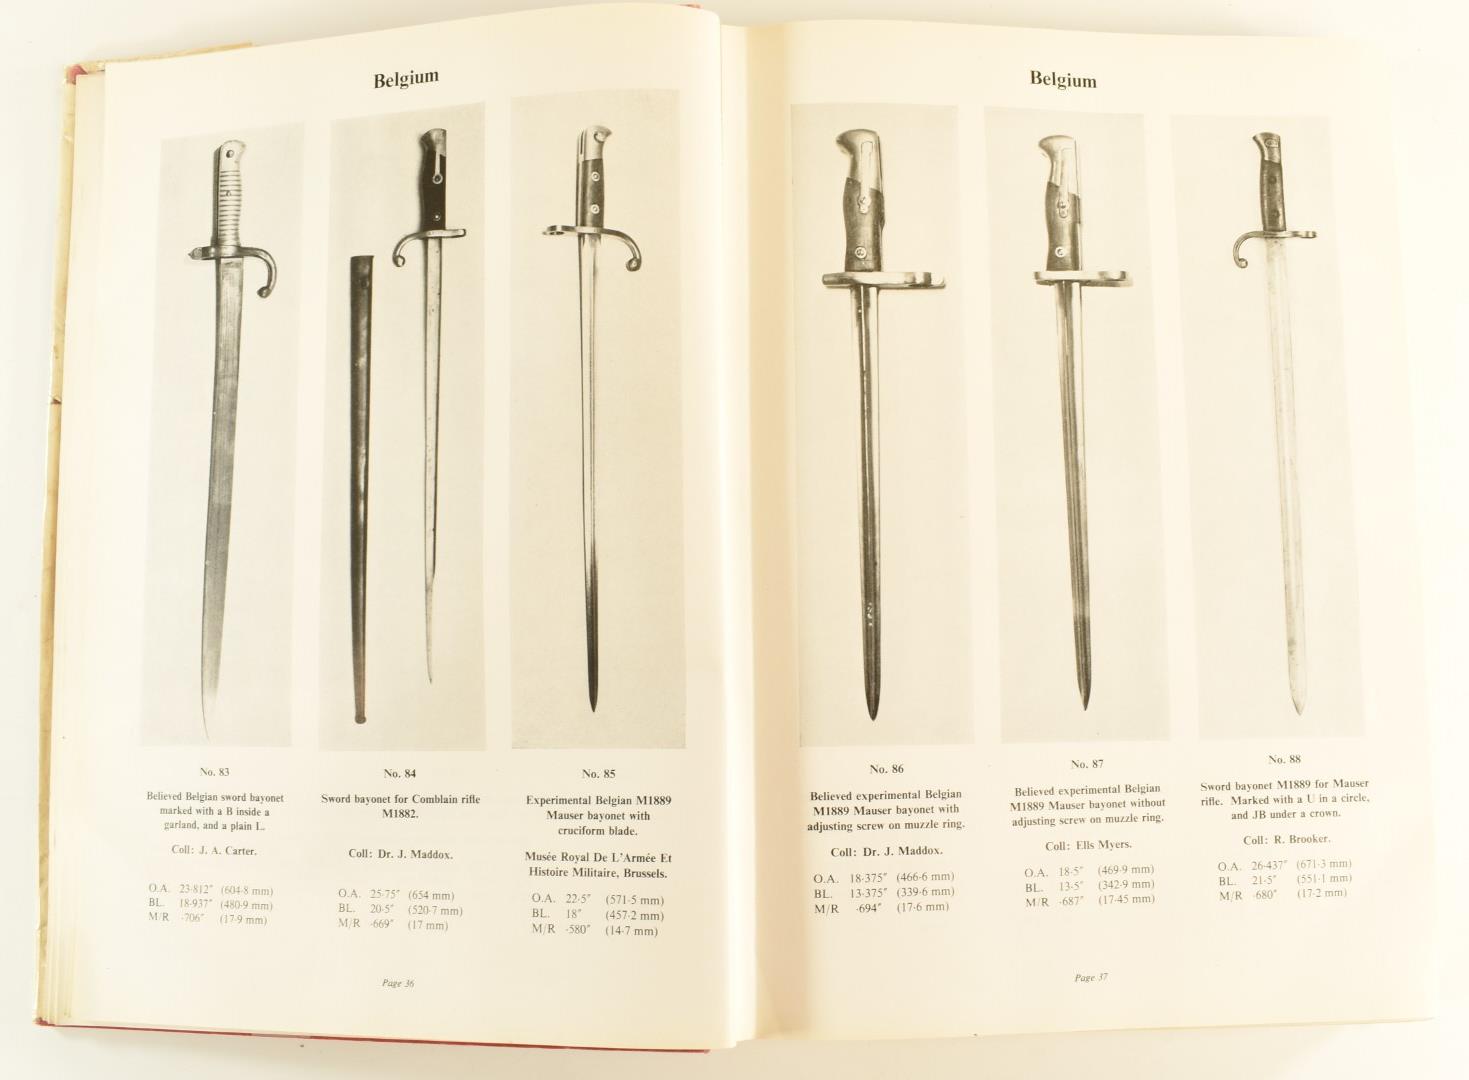 The Bayonet Book by John Watts and Peter White, first edition 1975 - Image 3 of 10